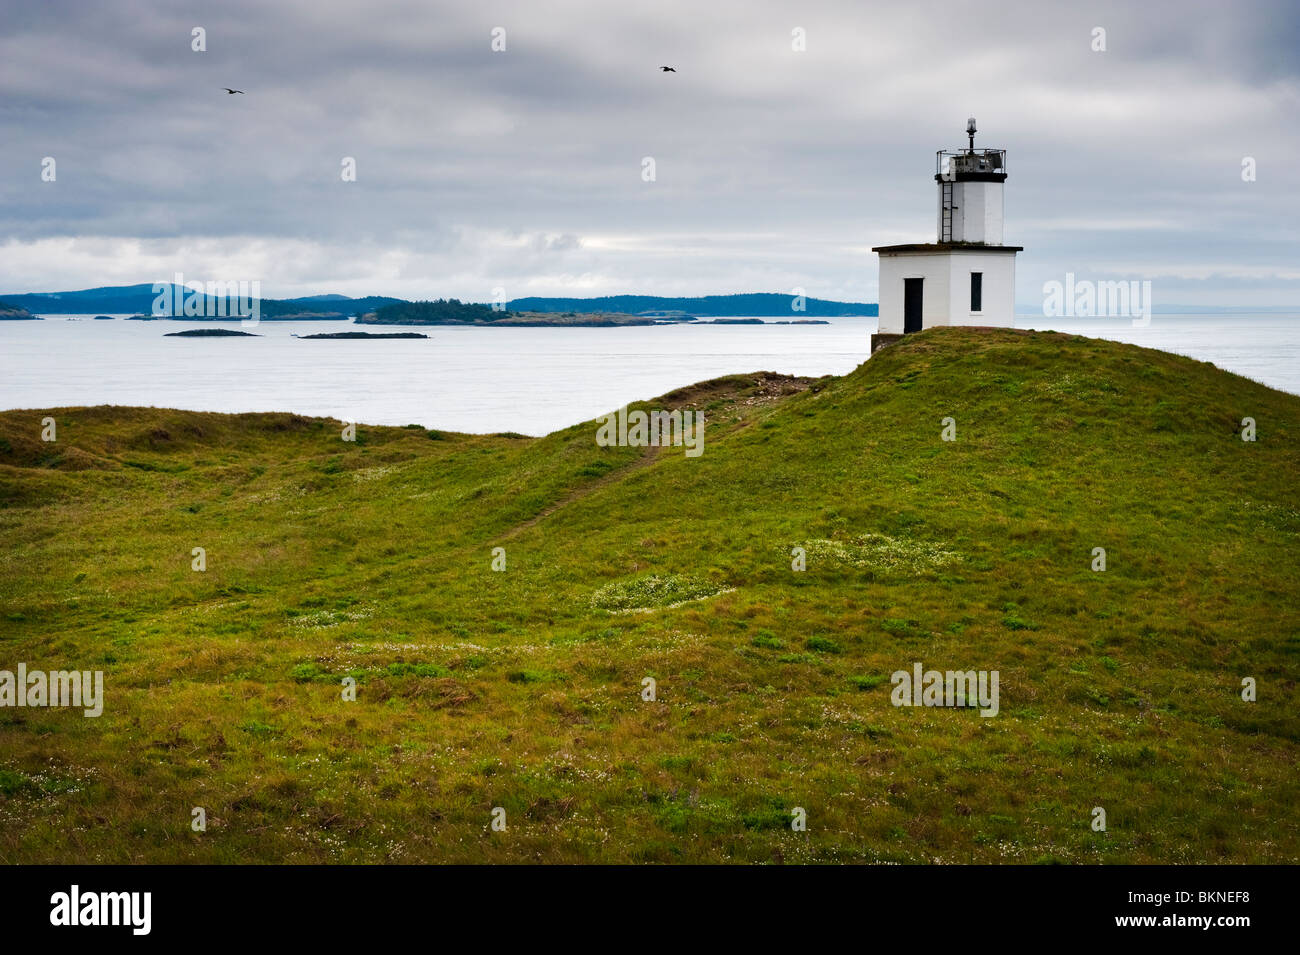 The southern tip of San Juan Island, Washington is known as Cattle Point. This modern lighthouse was built in 1935. Stock Photo